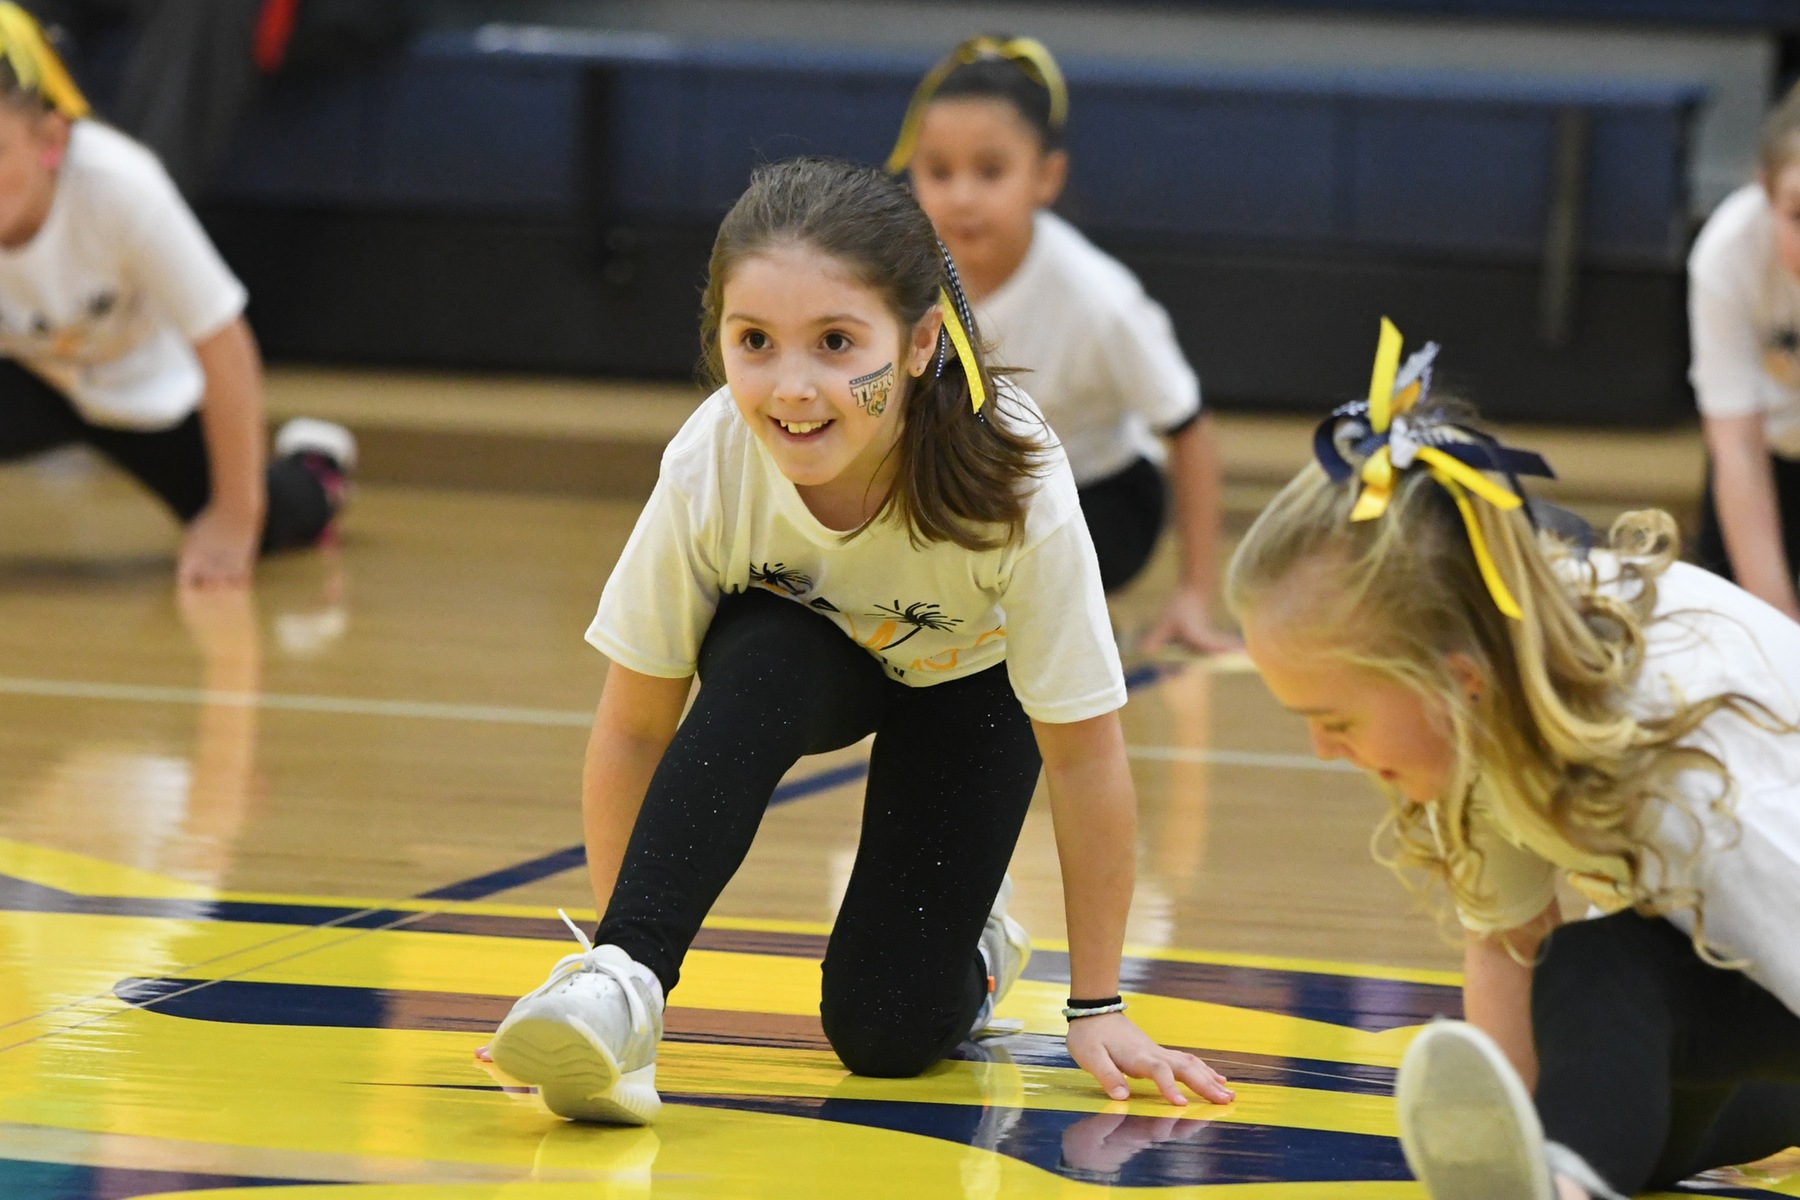 MCC Cheer/Dance team to host youth camps Jan. 22 and Feb. 5